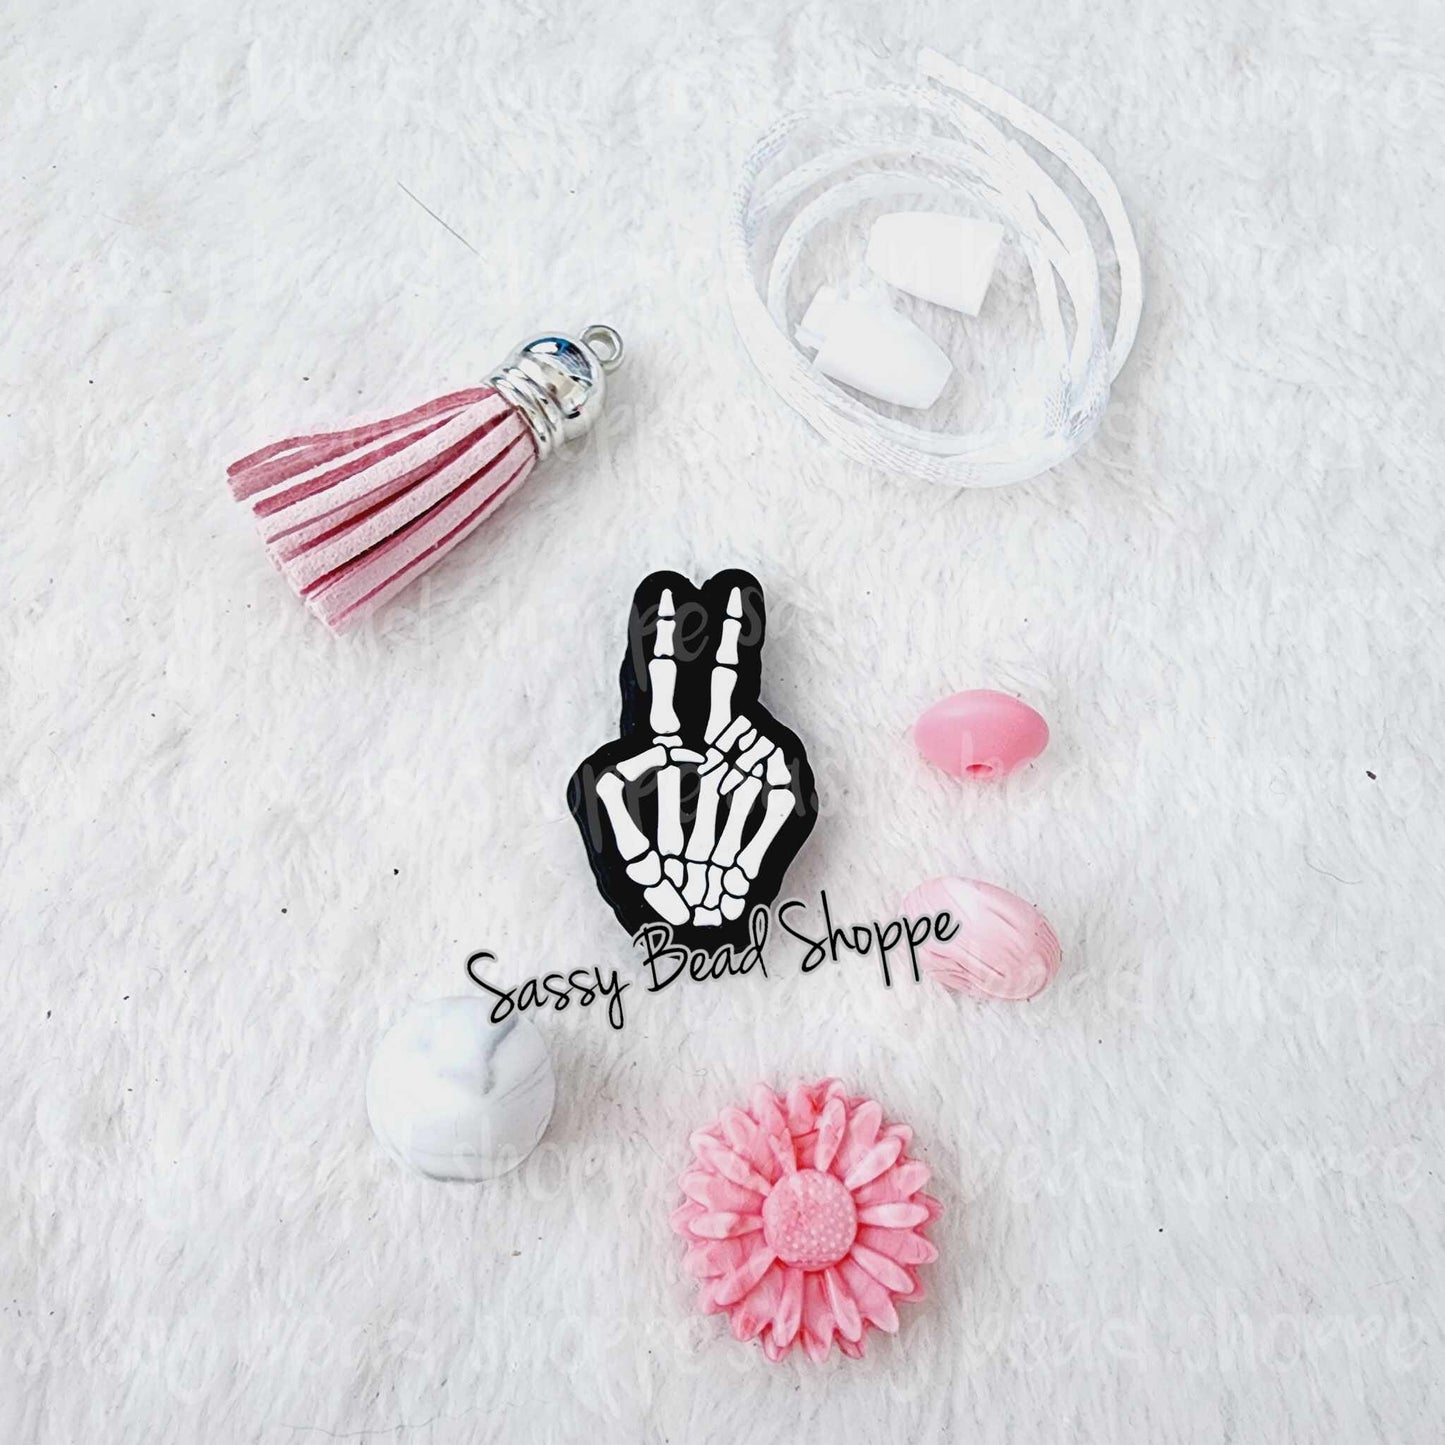 Sassy Bead Shoppe Pink Vibes Car Charm What you will receive in your kit